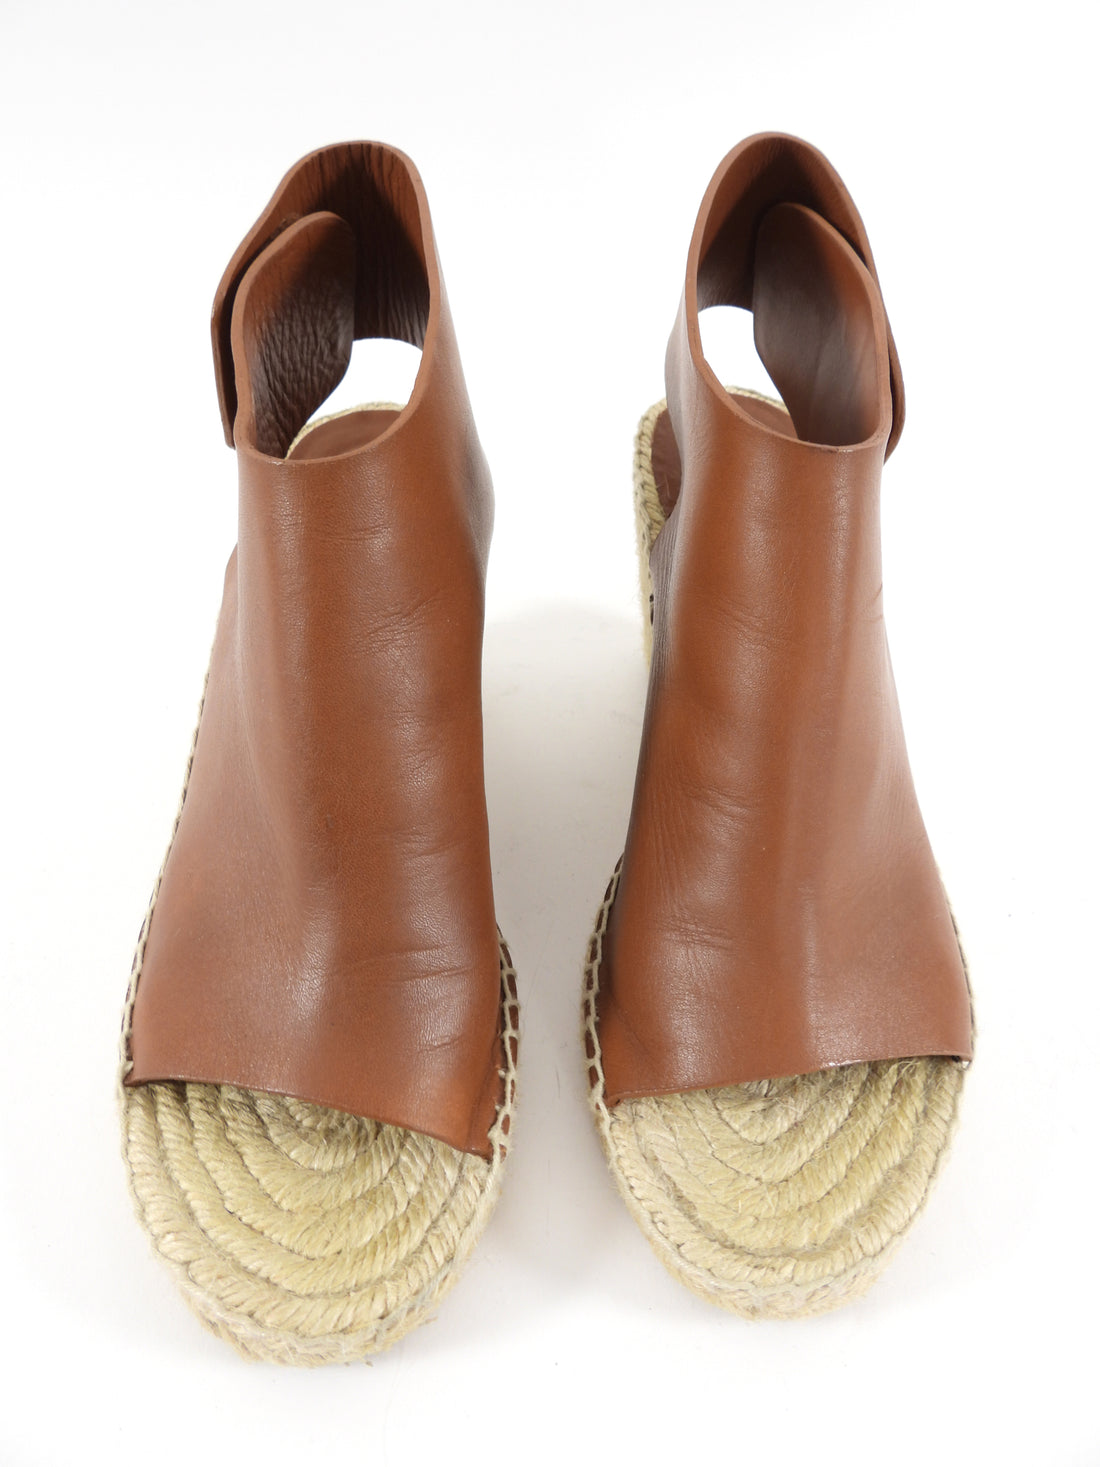 Celine Phoebe Philo Brown Leather Espadrille Wedge Shoes - 37